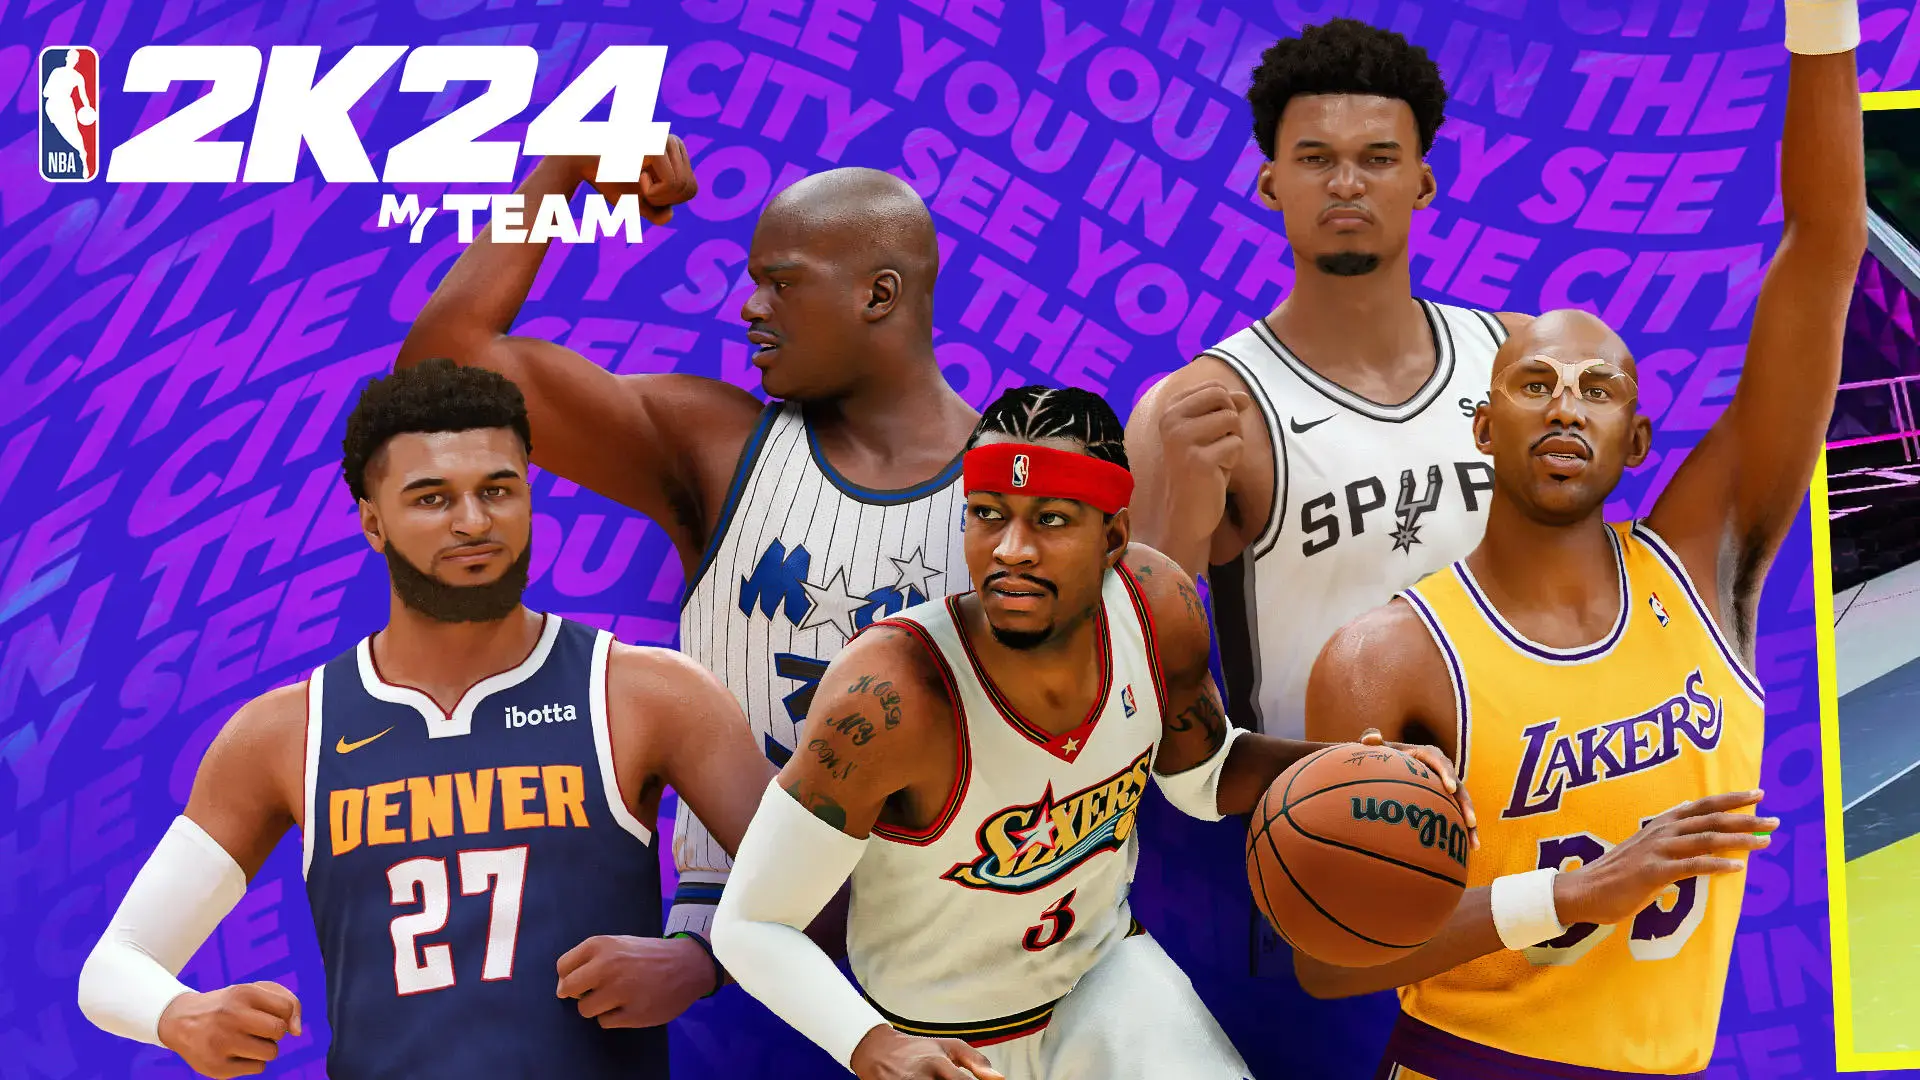 Banner of 『NBA 2K24』の「マイチーム」 207.00.227307215